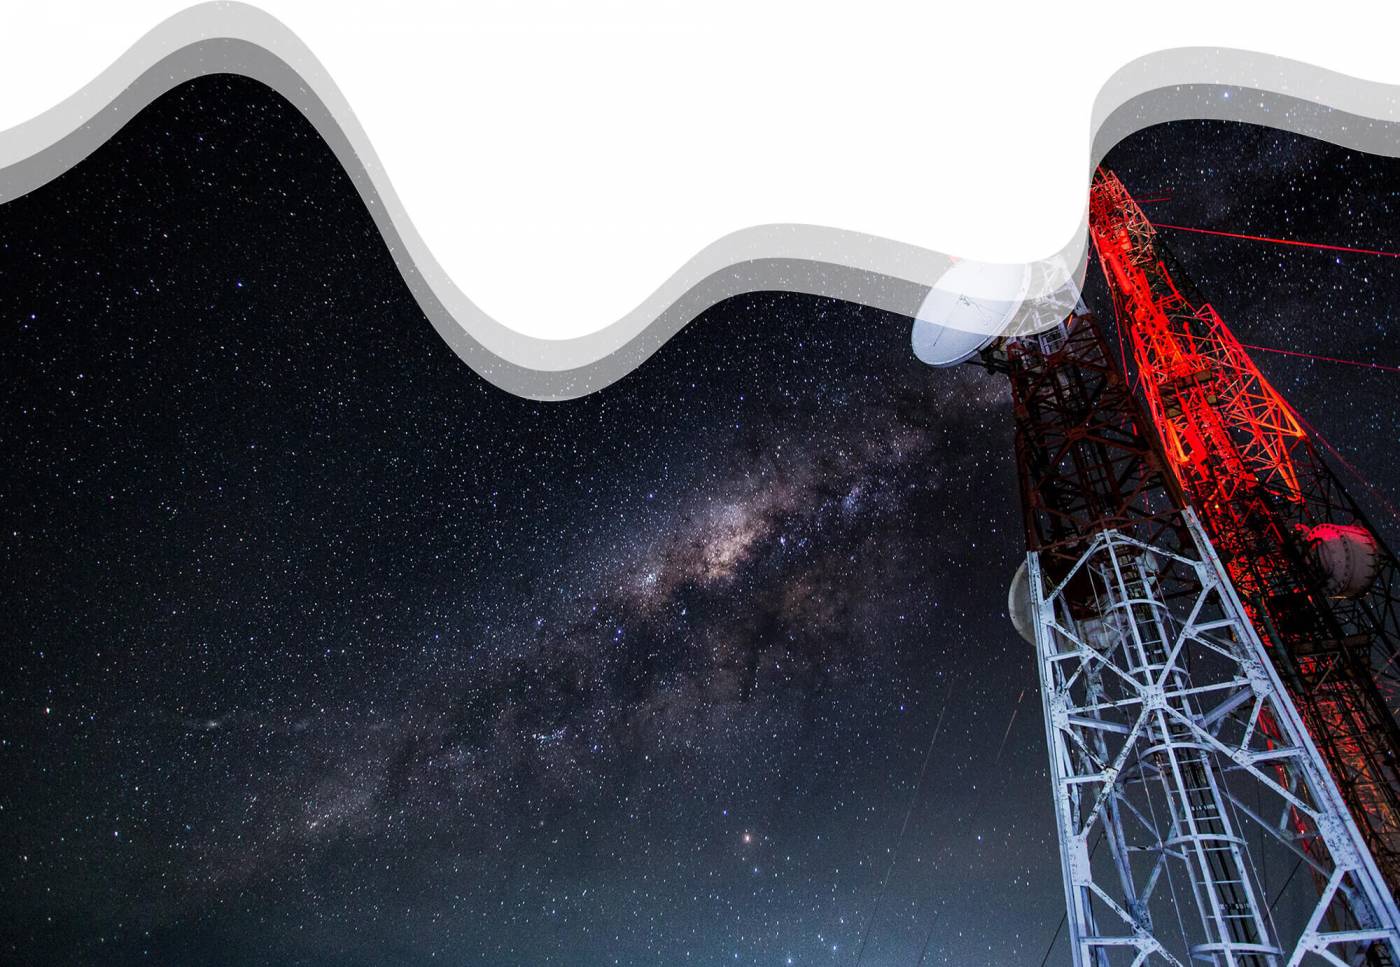 Radio towers in space